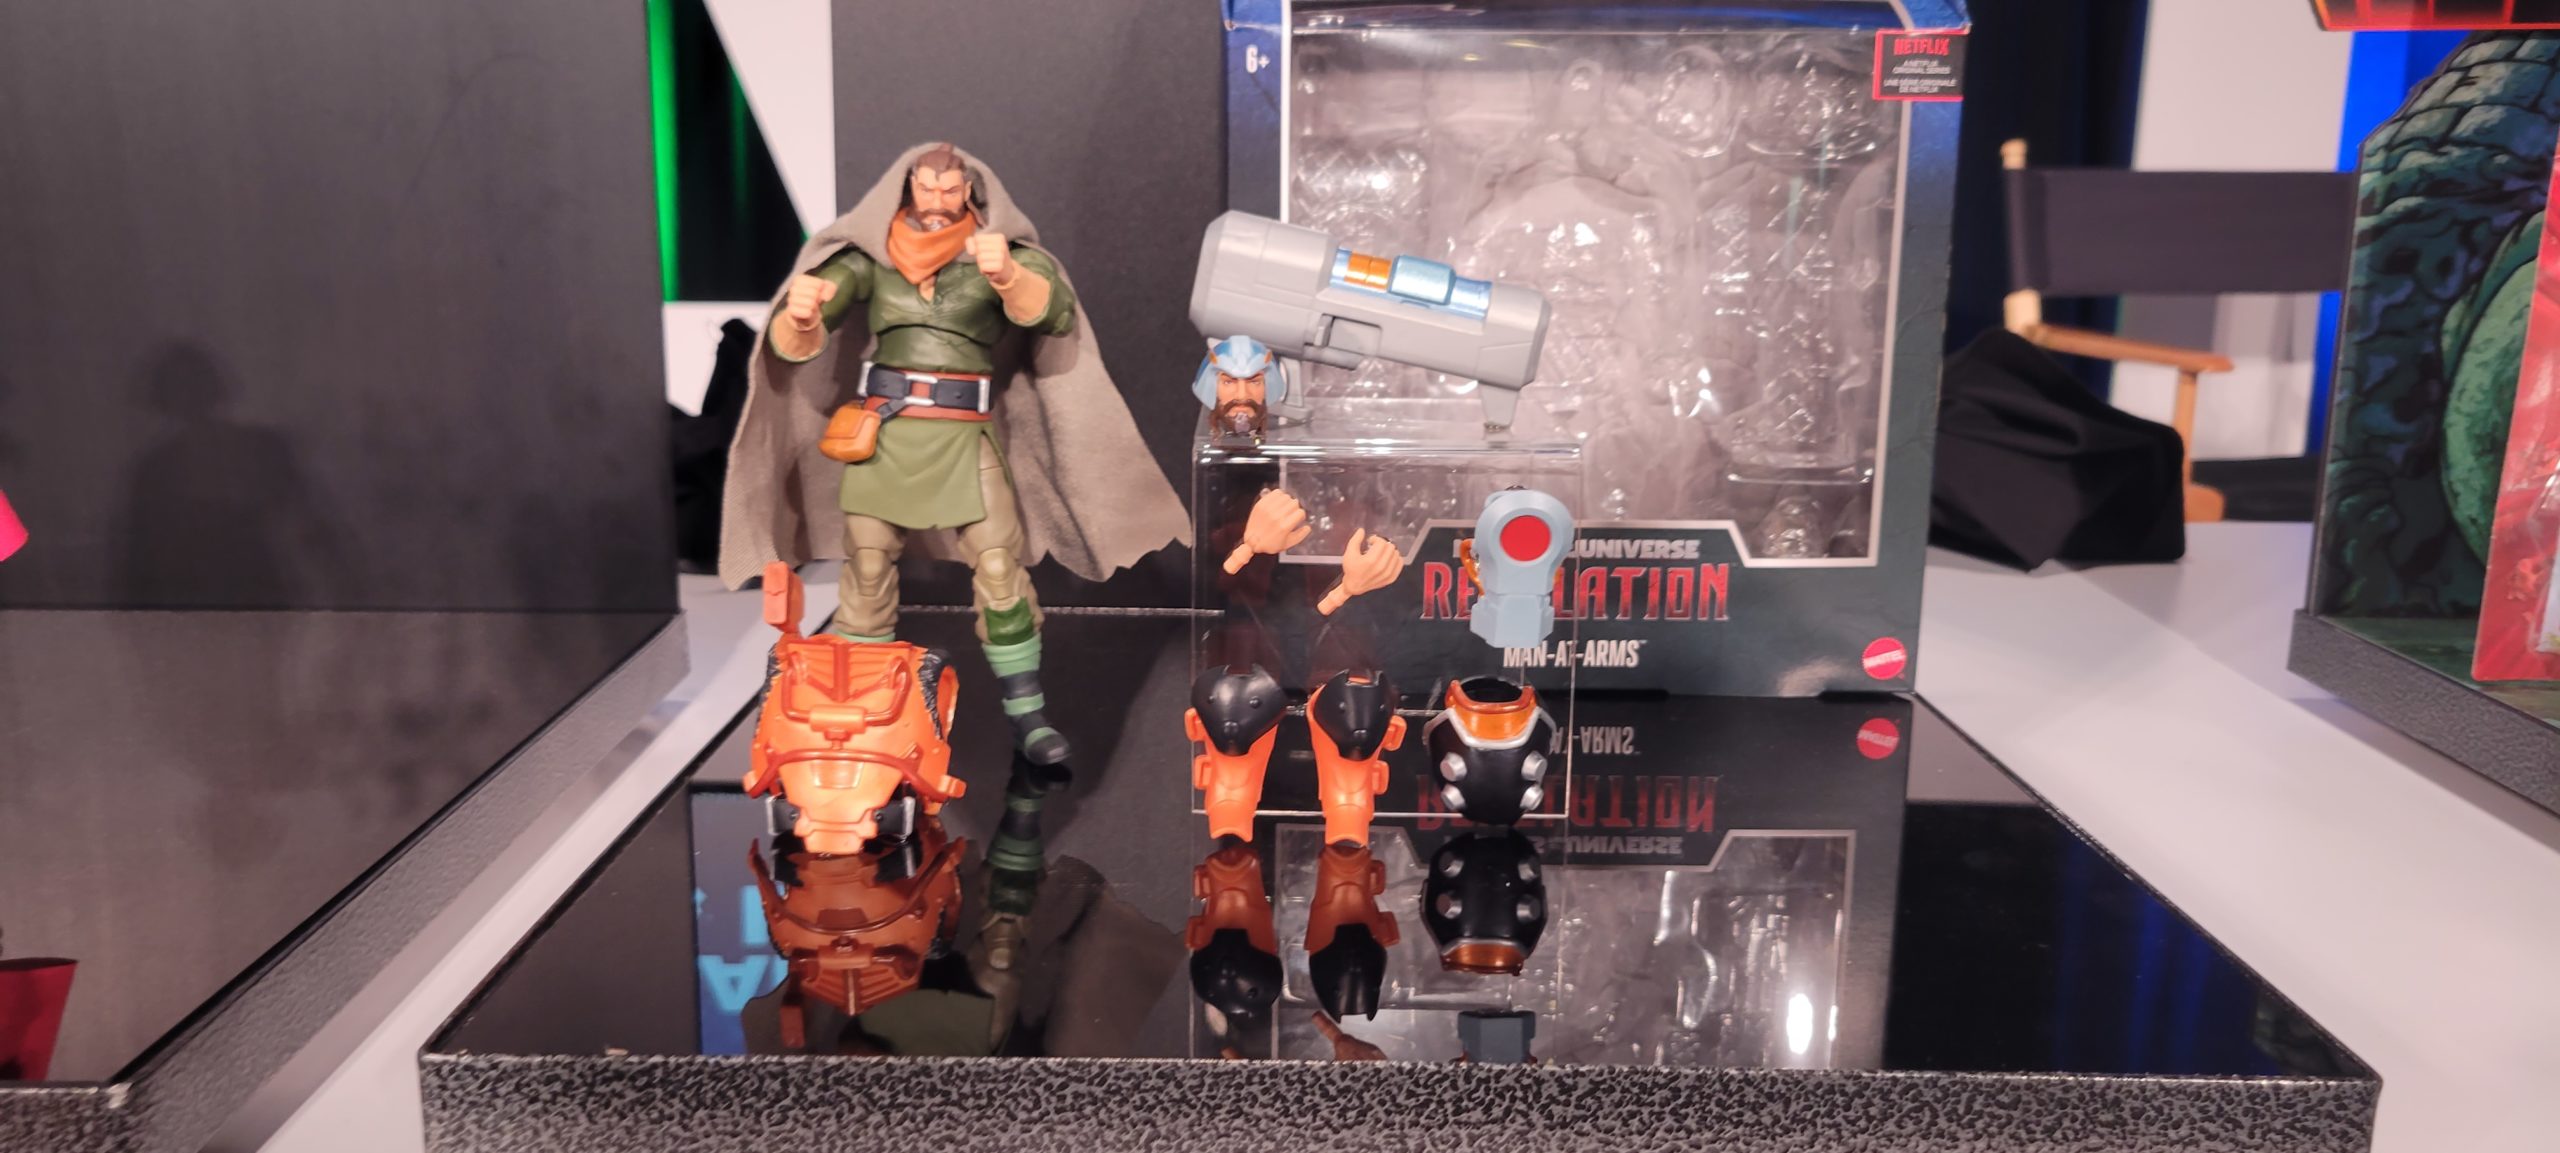 He-Man and the Masters of the Universe MOTU Mattel